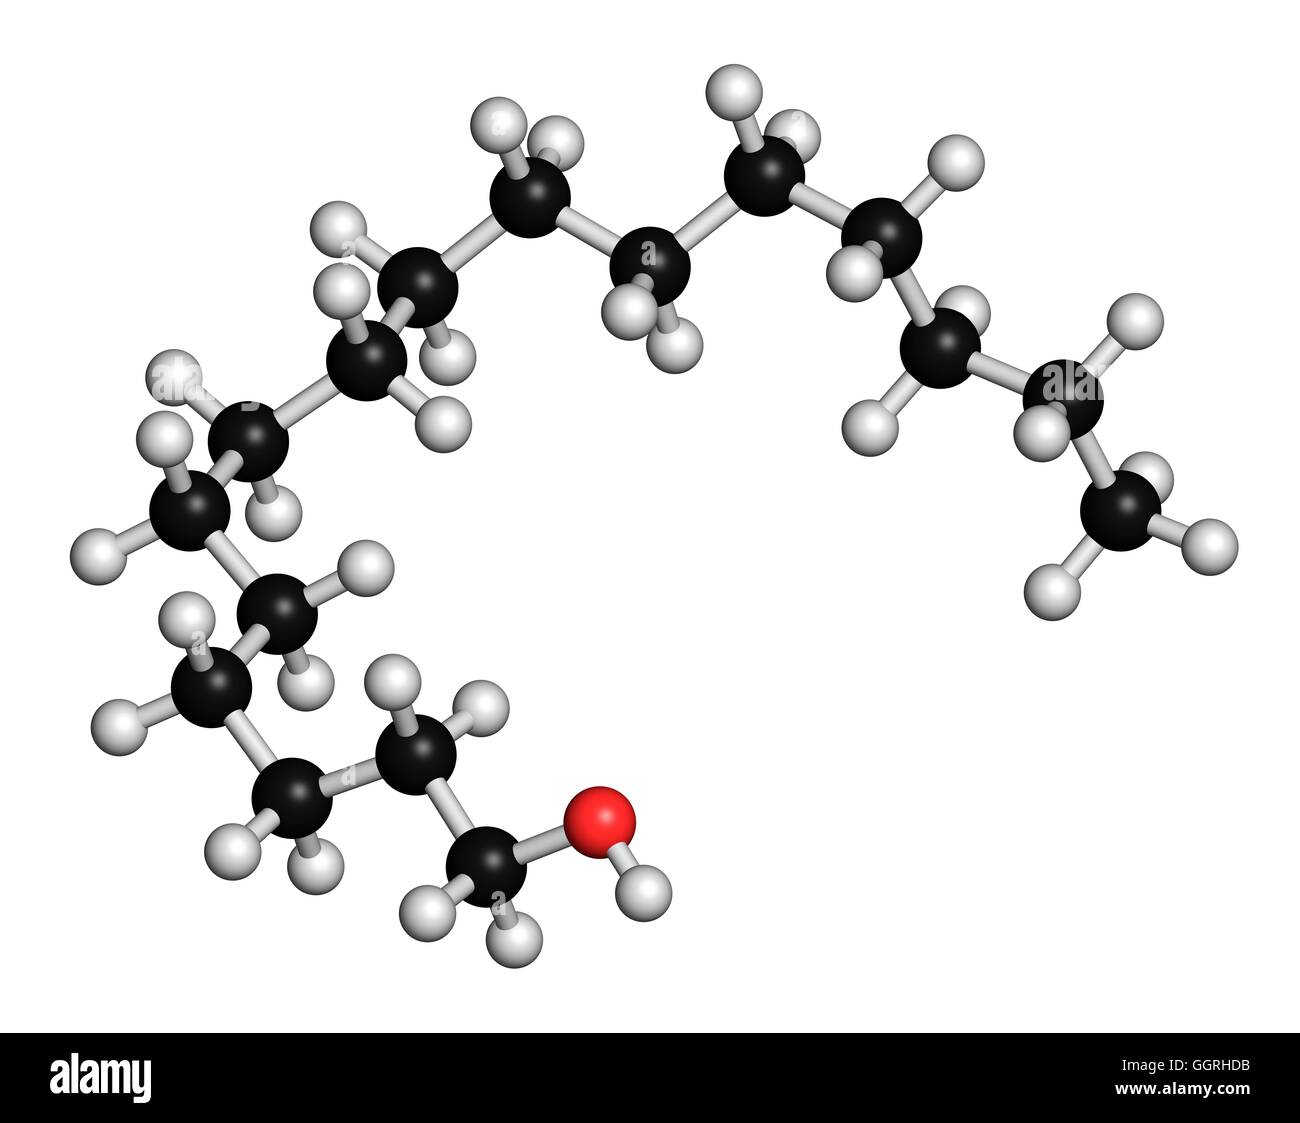 Cetyl Alcohol, Palmityl Alcohol Molecule. Used in Cosmetic Industry, As  Emulsifying Agent in Pharmaceutical Preparations Stock Vector -  Illustration of icon, atomic: 255863234